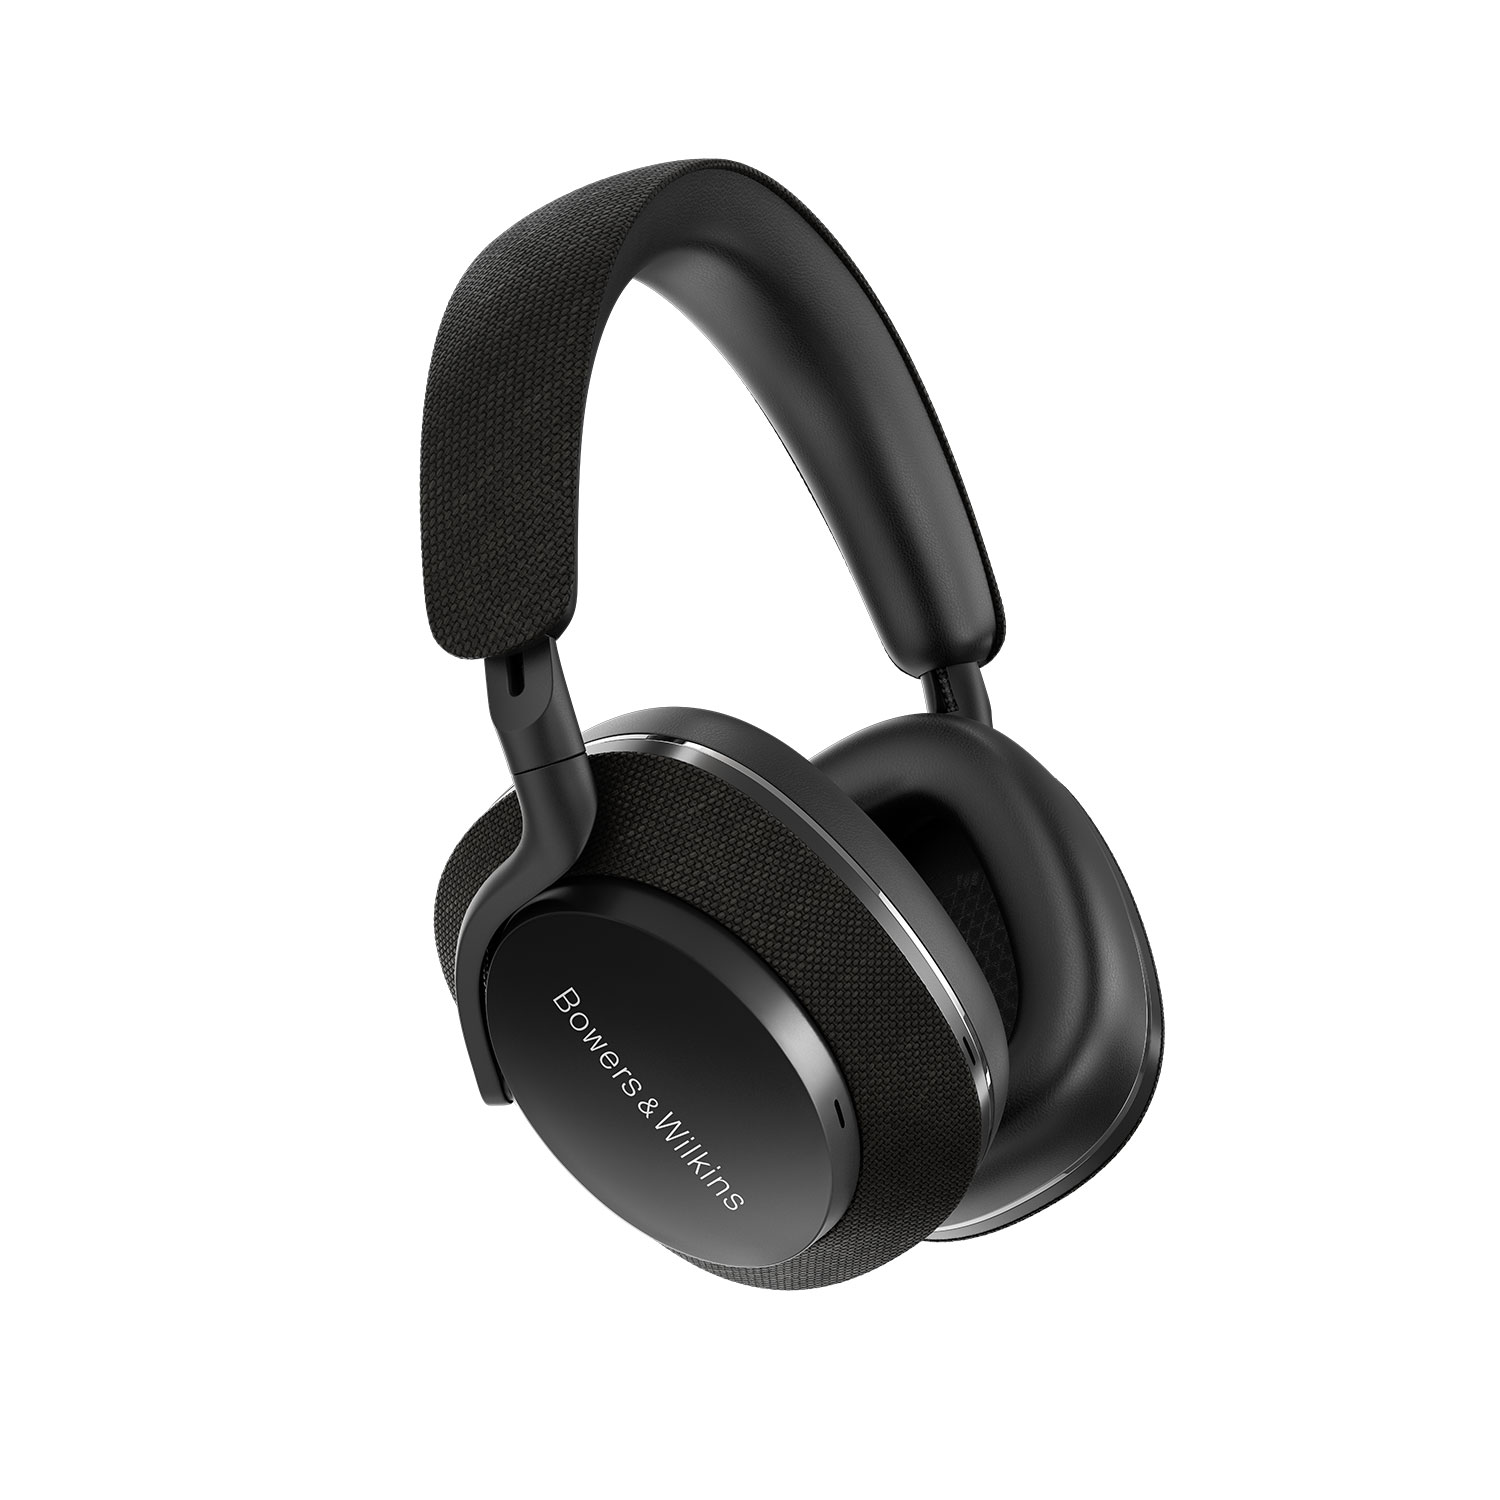 Bowers & Wilkins PX7 S2 Kabelloses Headset von Bowers & Wilkins